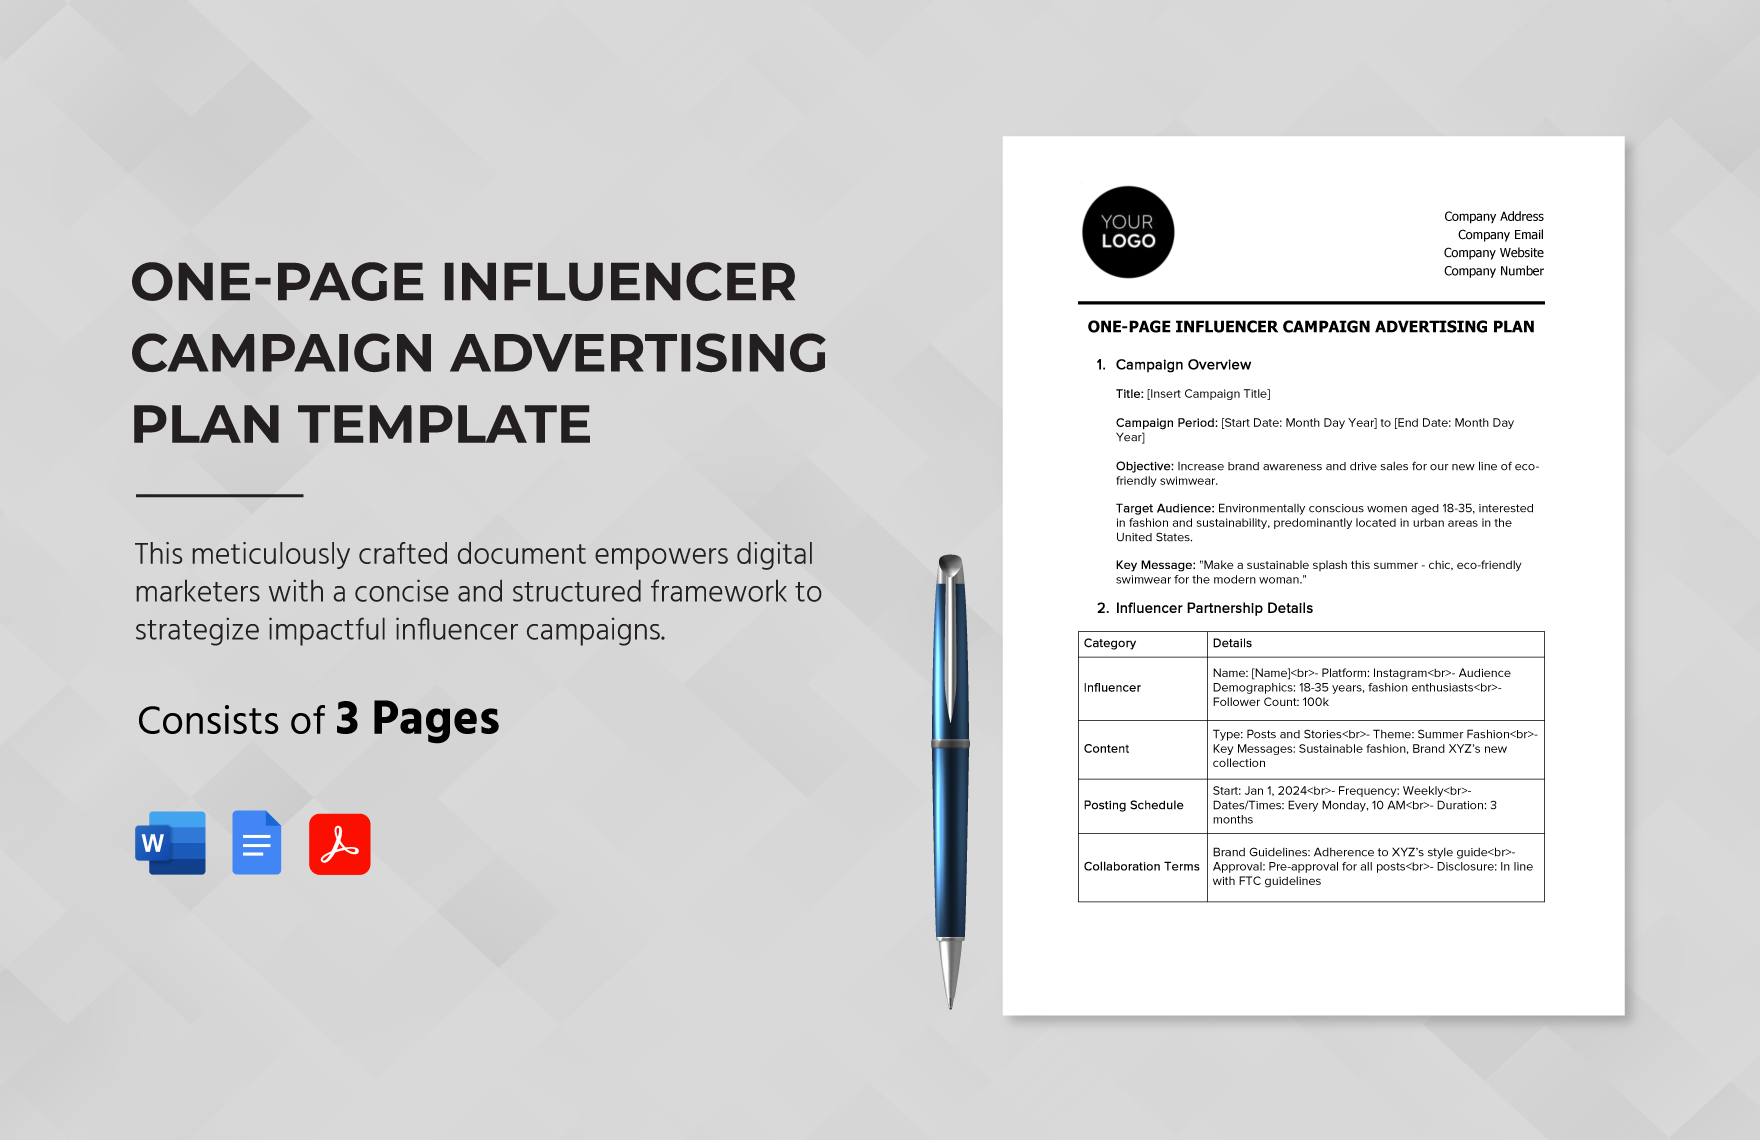 One-Page Influencer Campaign Advertising Plan Template